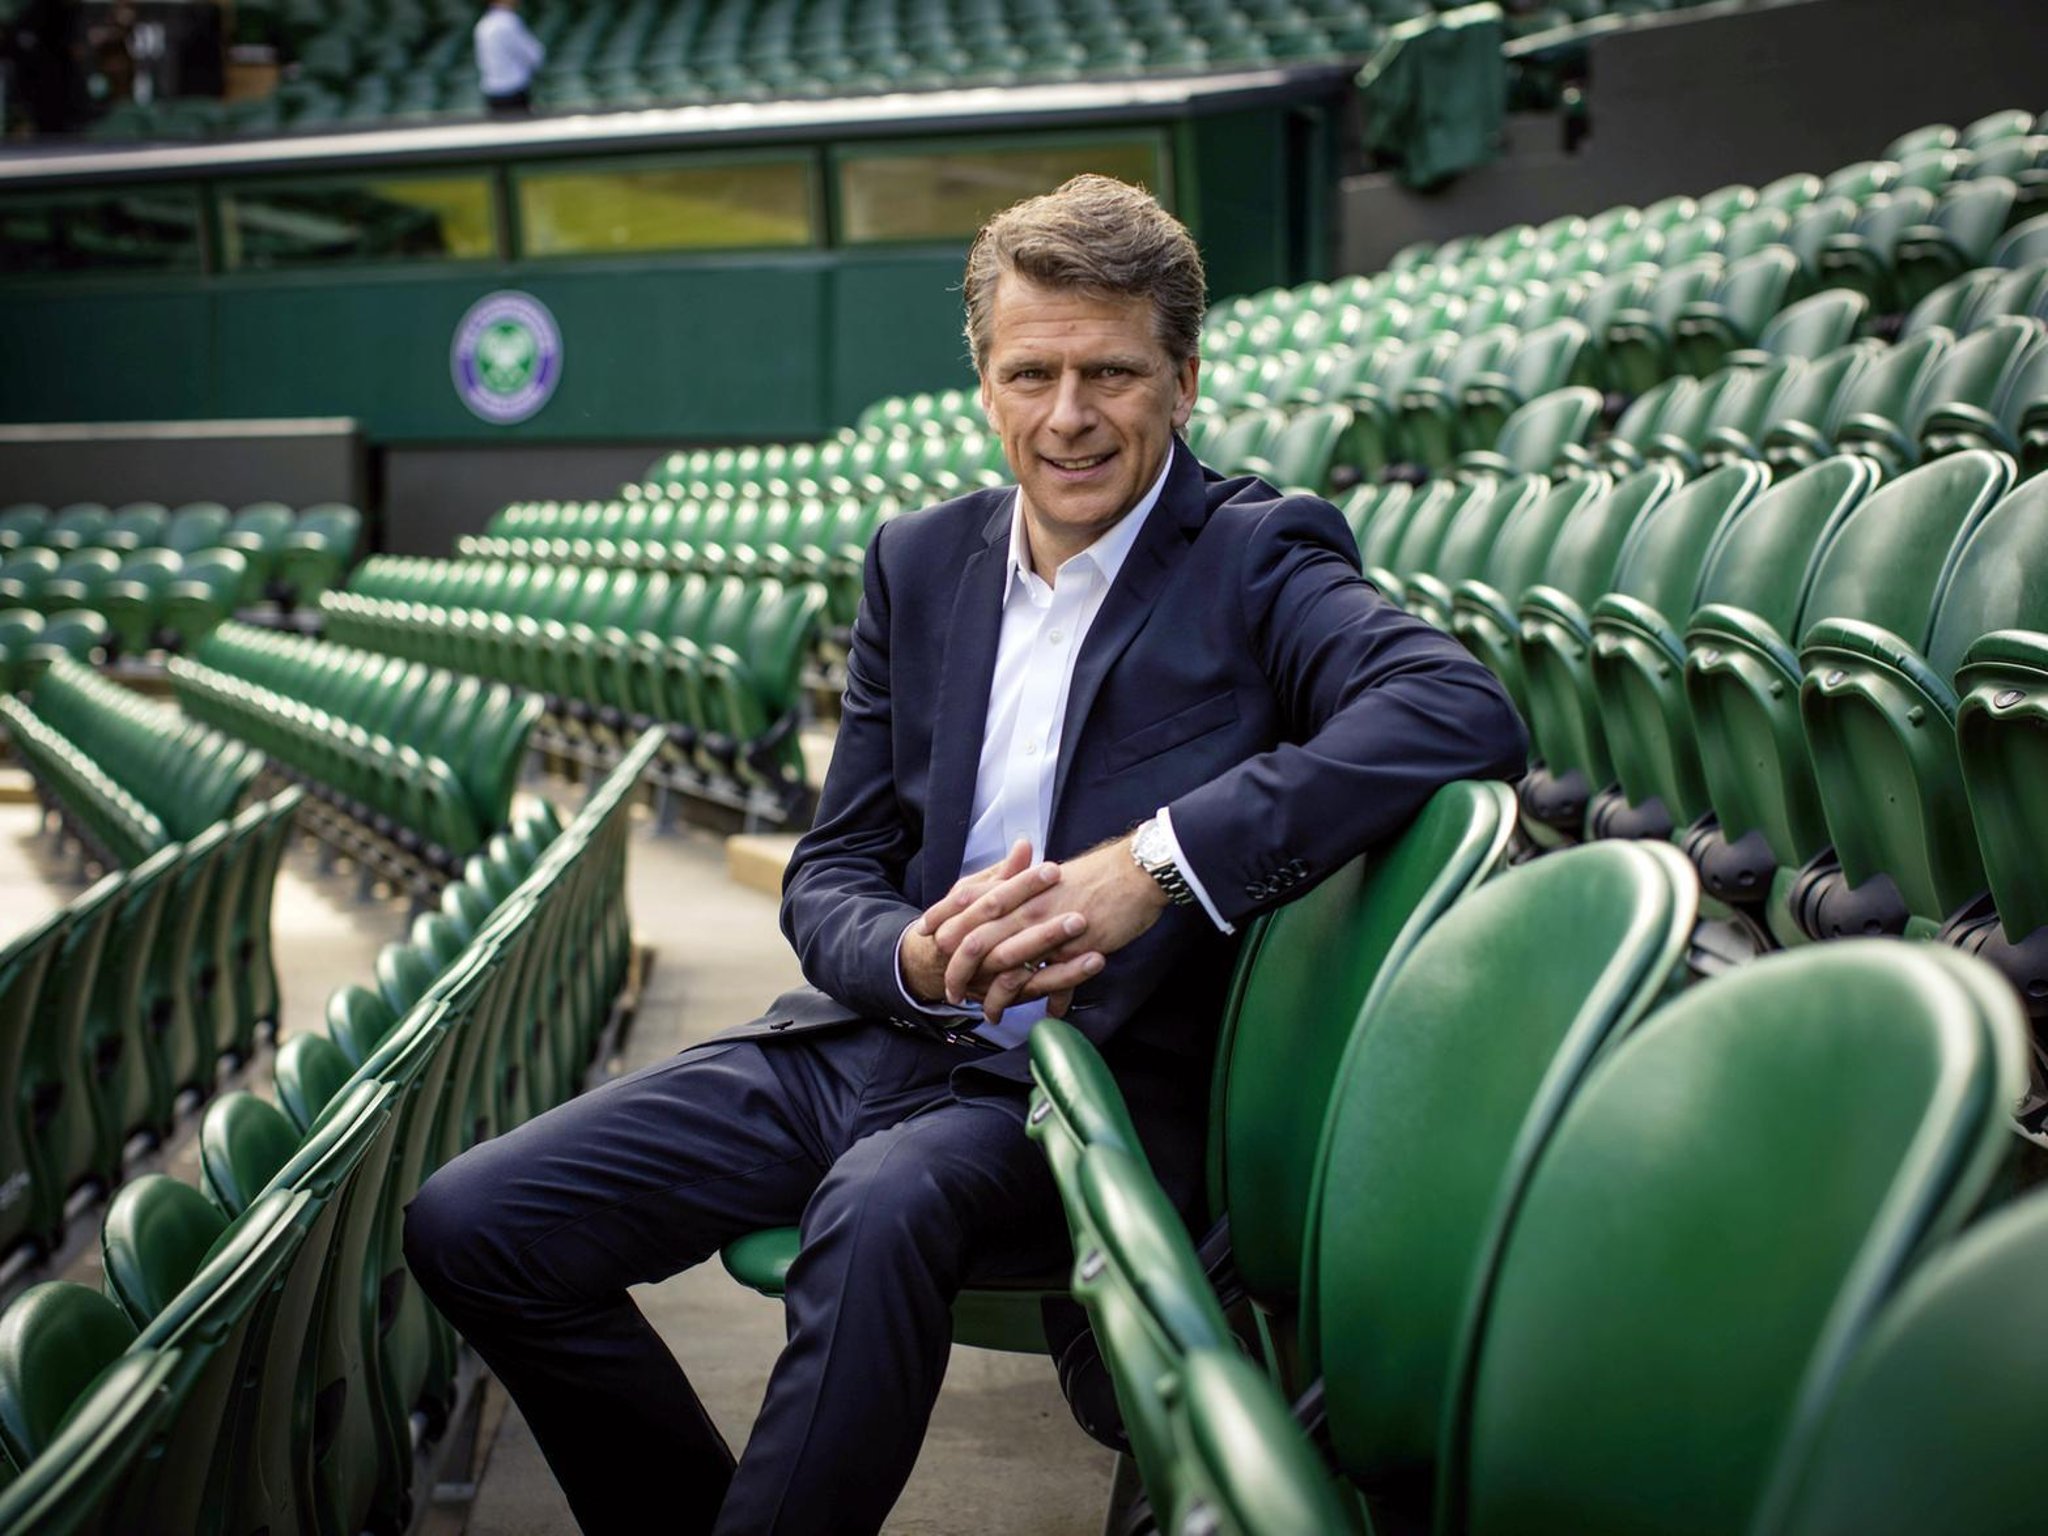 Andrew Castle about being back as Wimbledon BBC commentator -